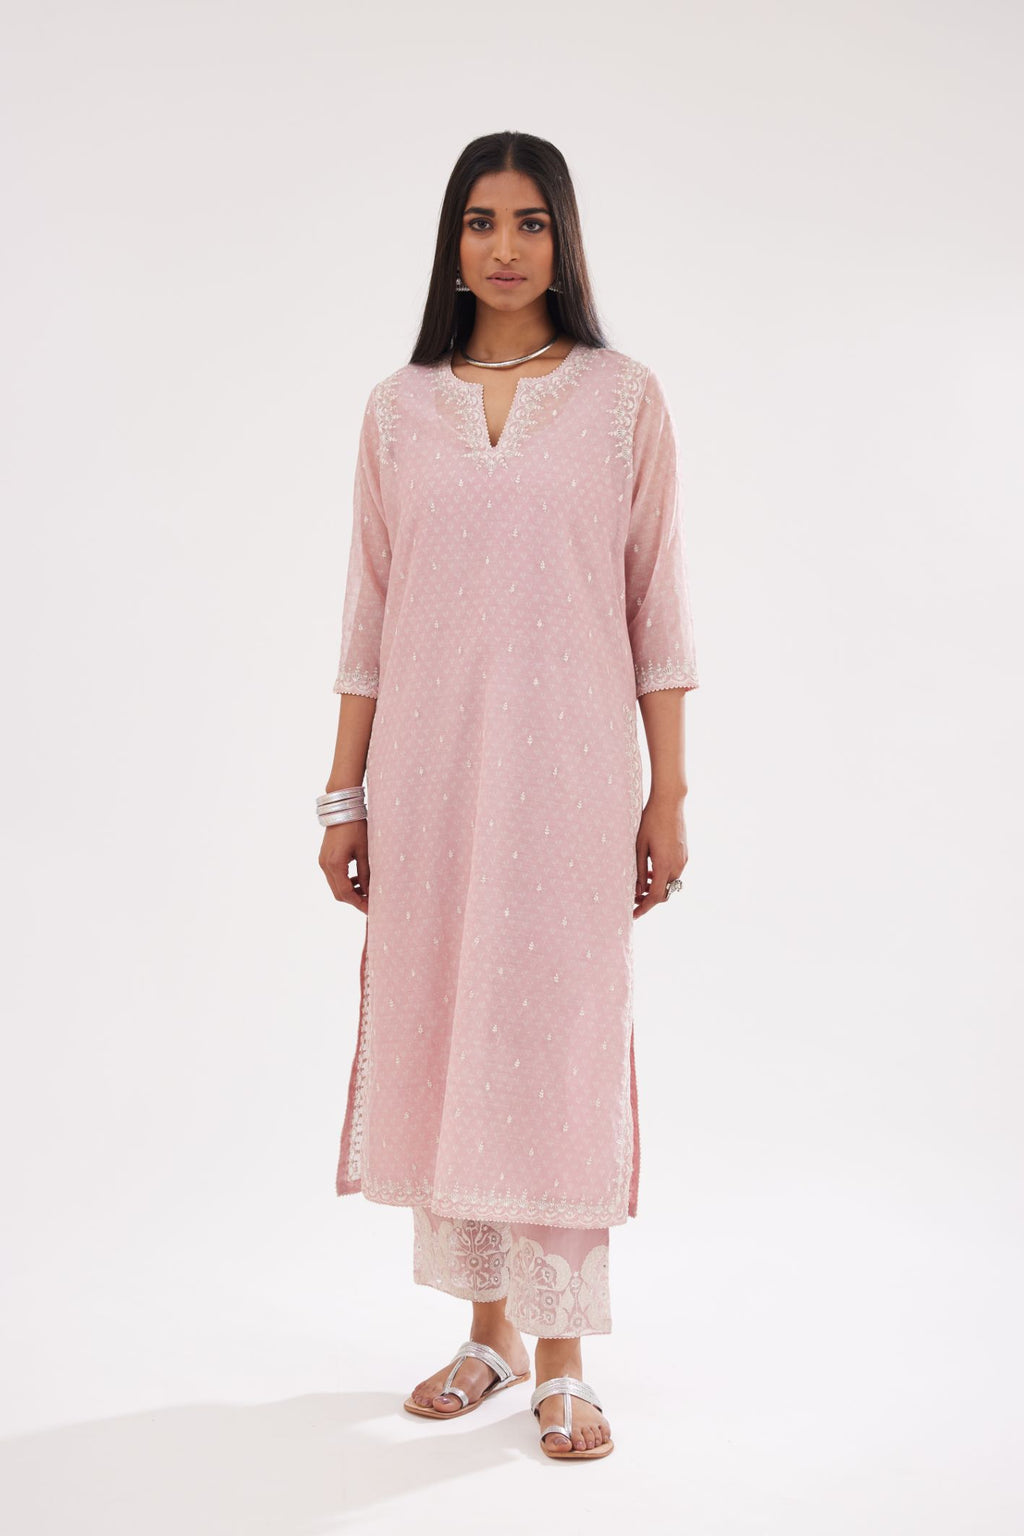 Pink cotton chanderi hand block printed kurta set with dori and silk thread embroidery at the neck, armholes, hem and sleeve cuffs.